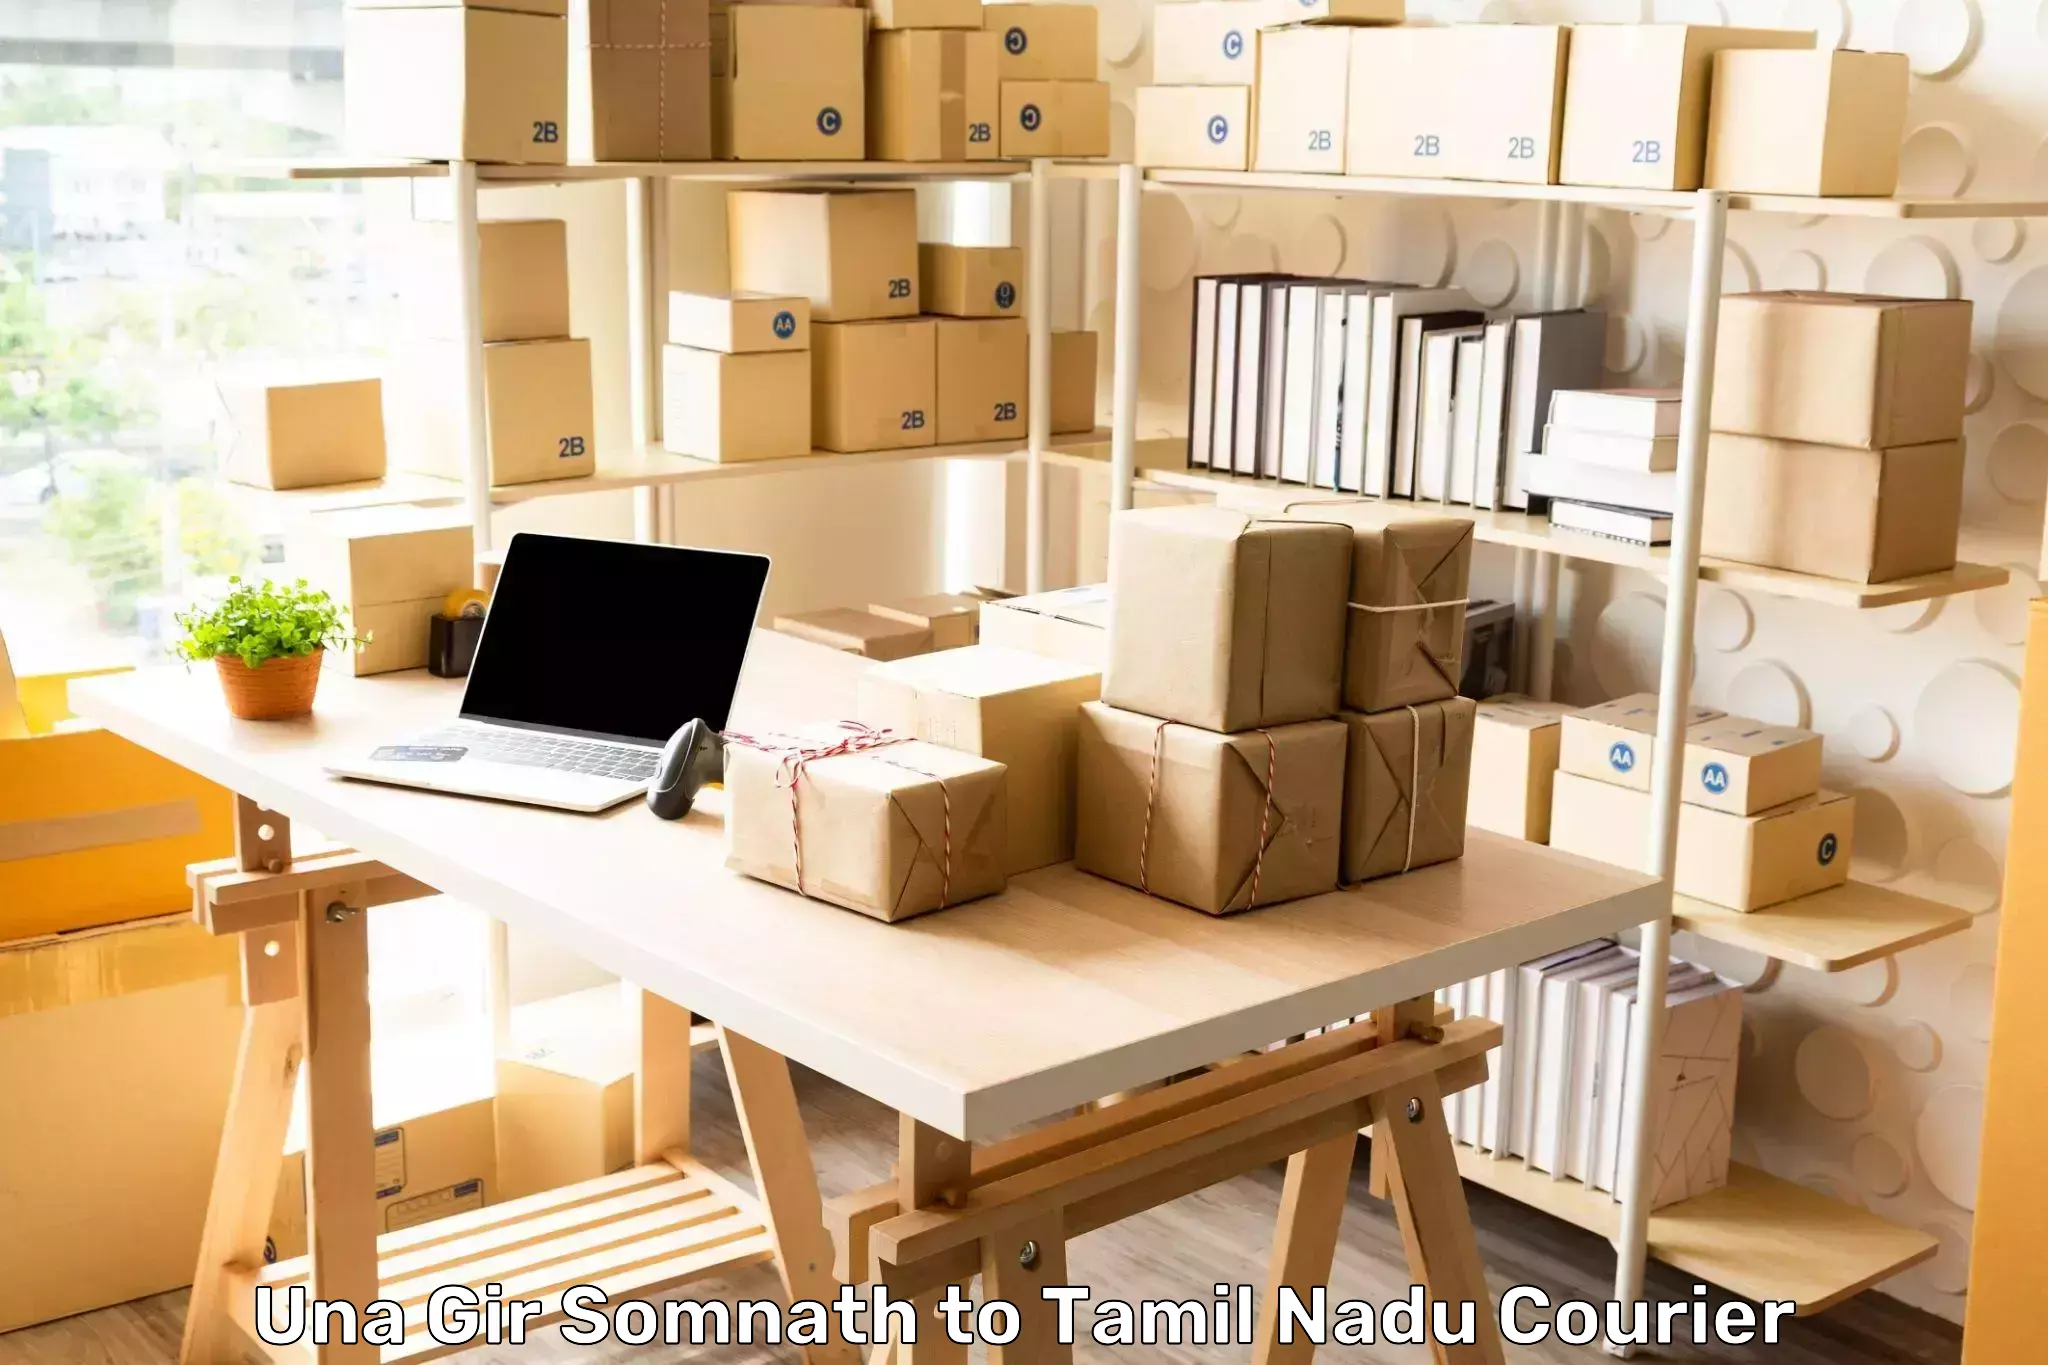 Special handling courier Una Gir Somnath to Sivaganga